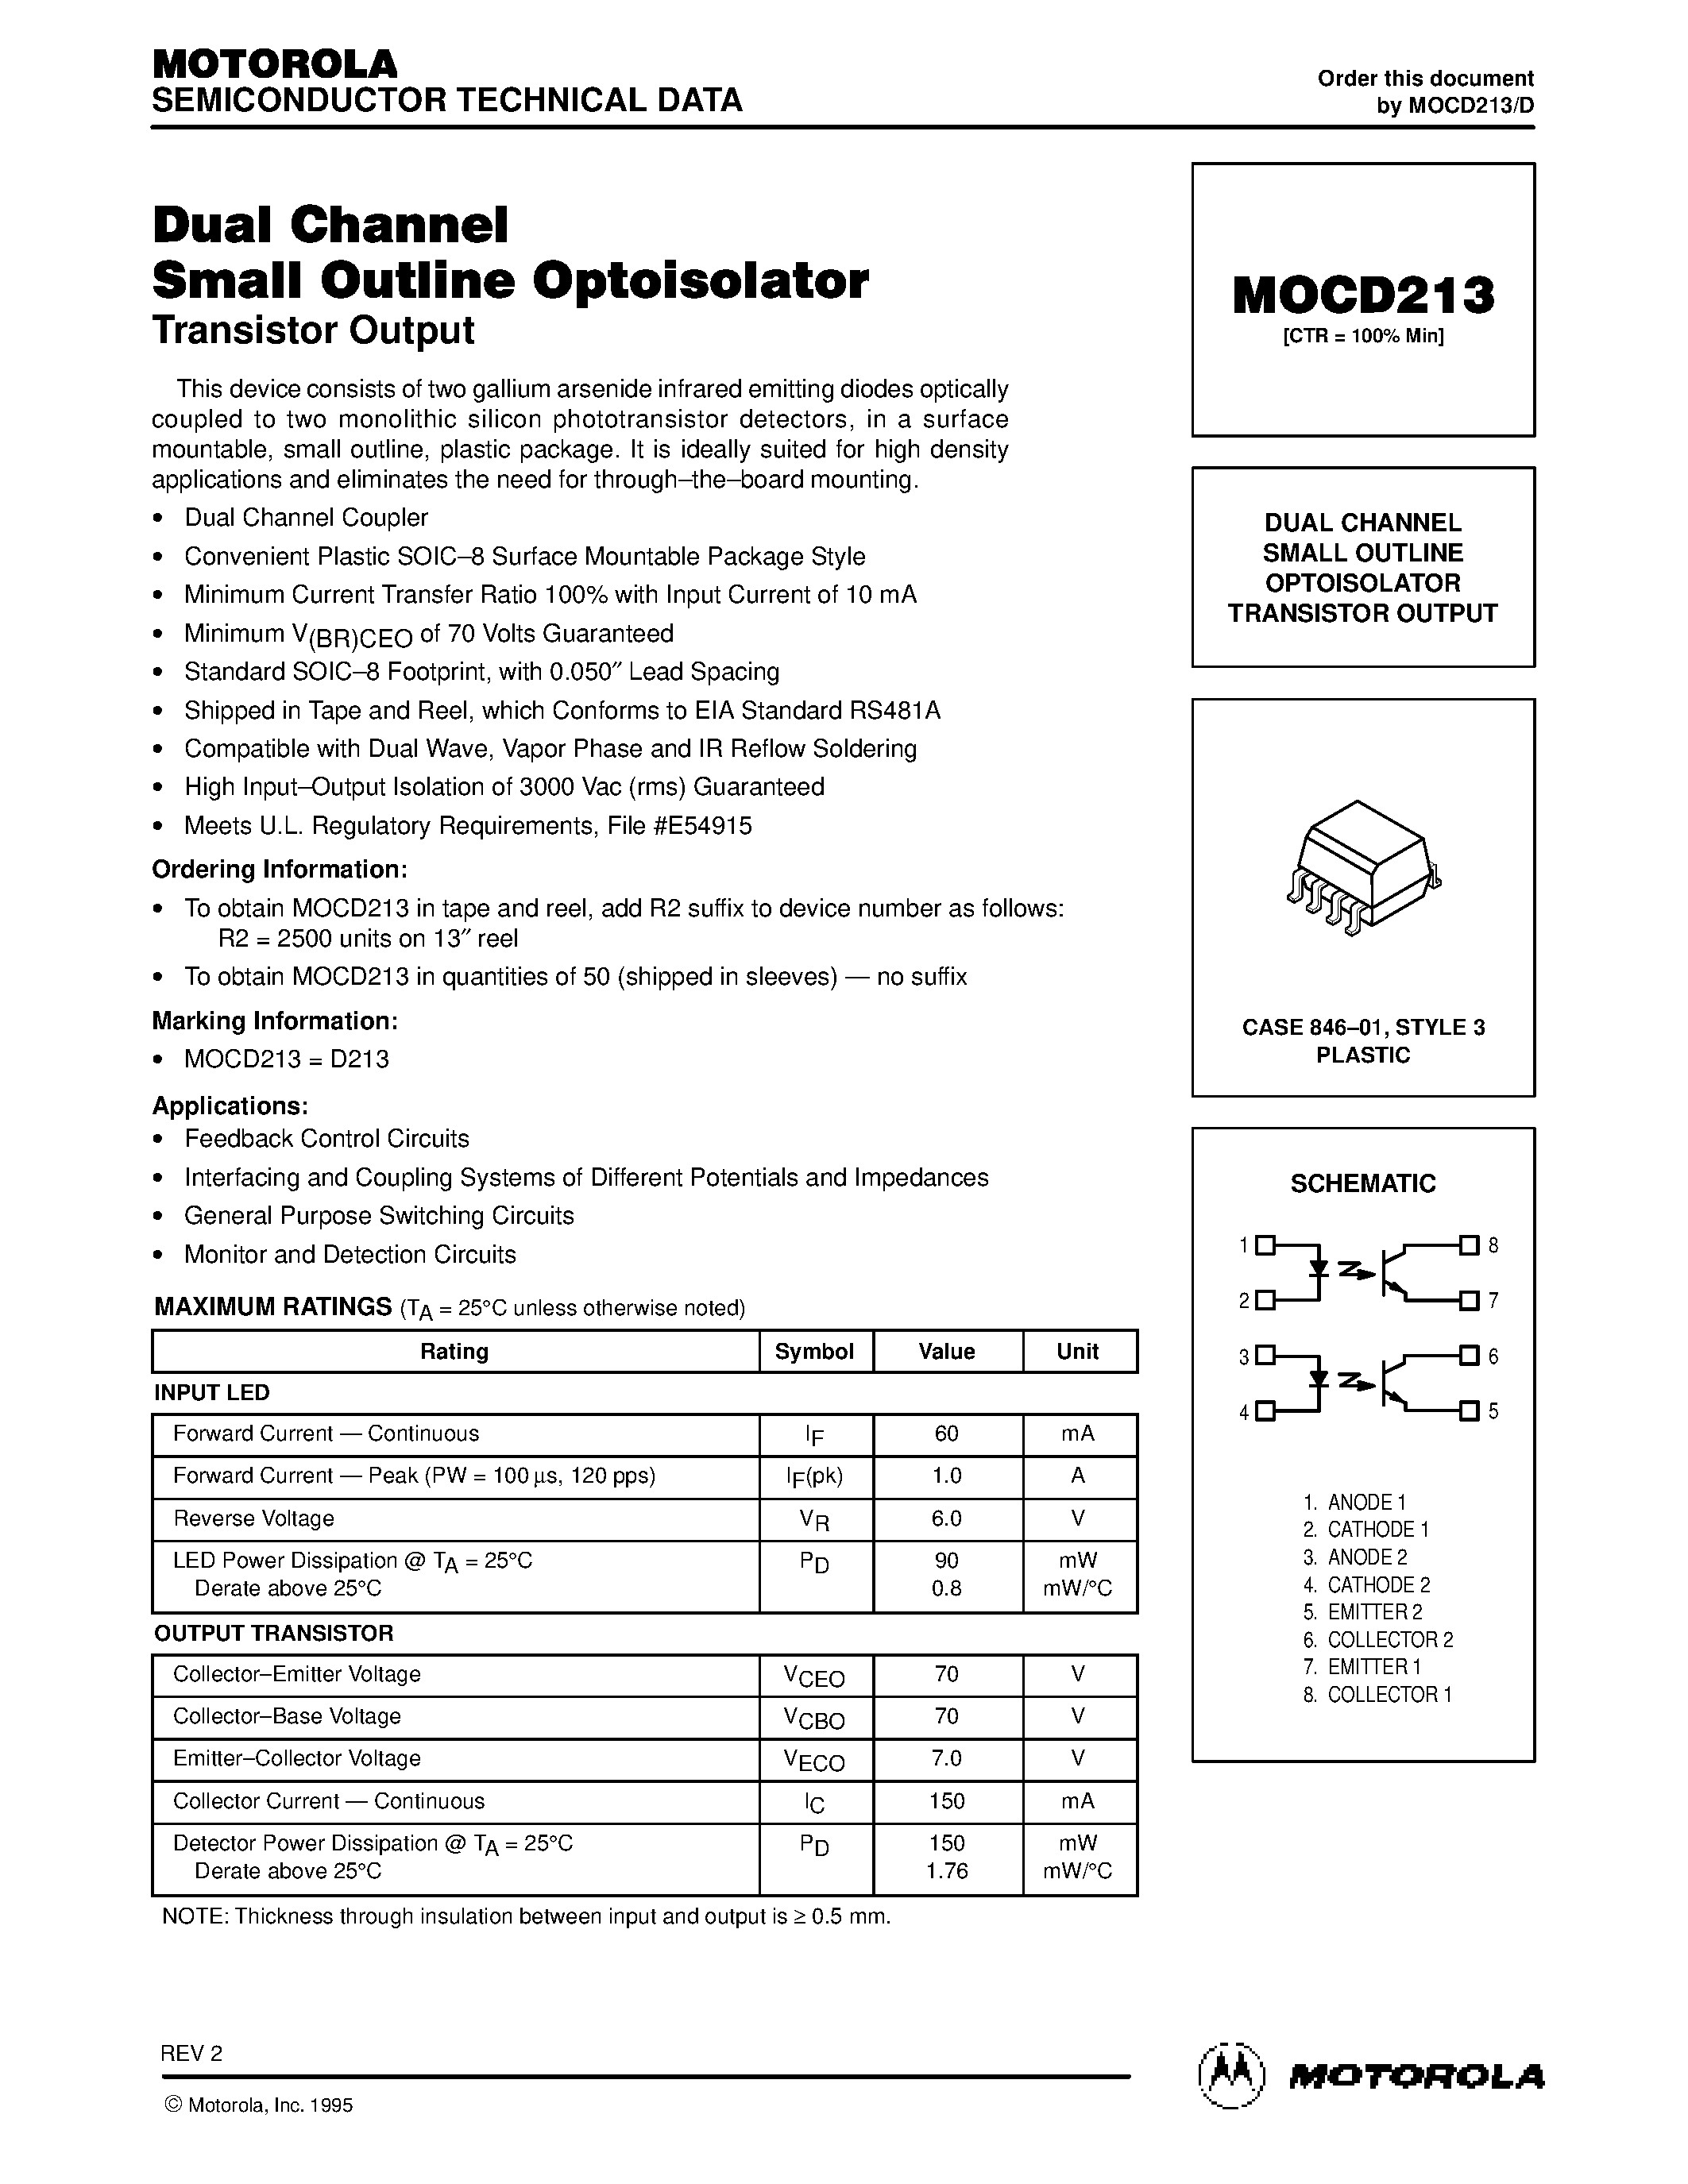 Даташит MOCD213 - DUAL CHANNEL SMALL OUTLINE OPTOISOLATOR TRANSISTOR OUTPUT страница 1